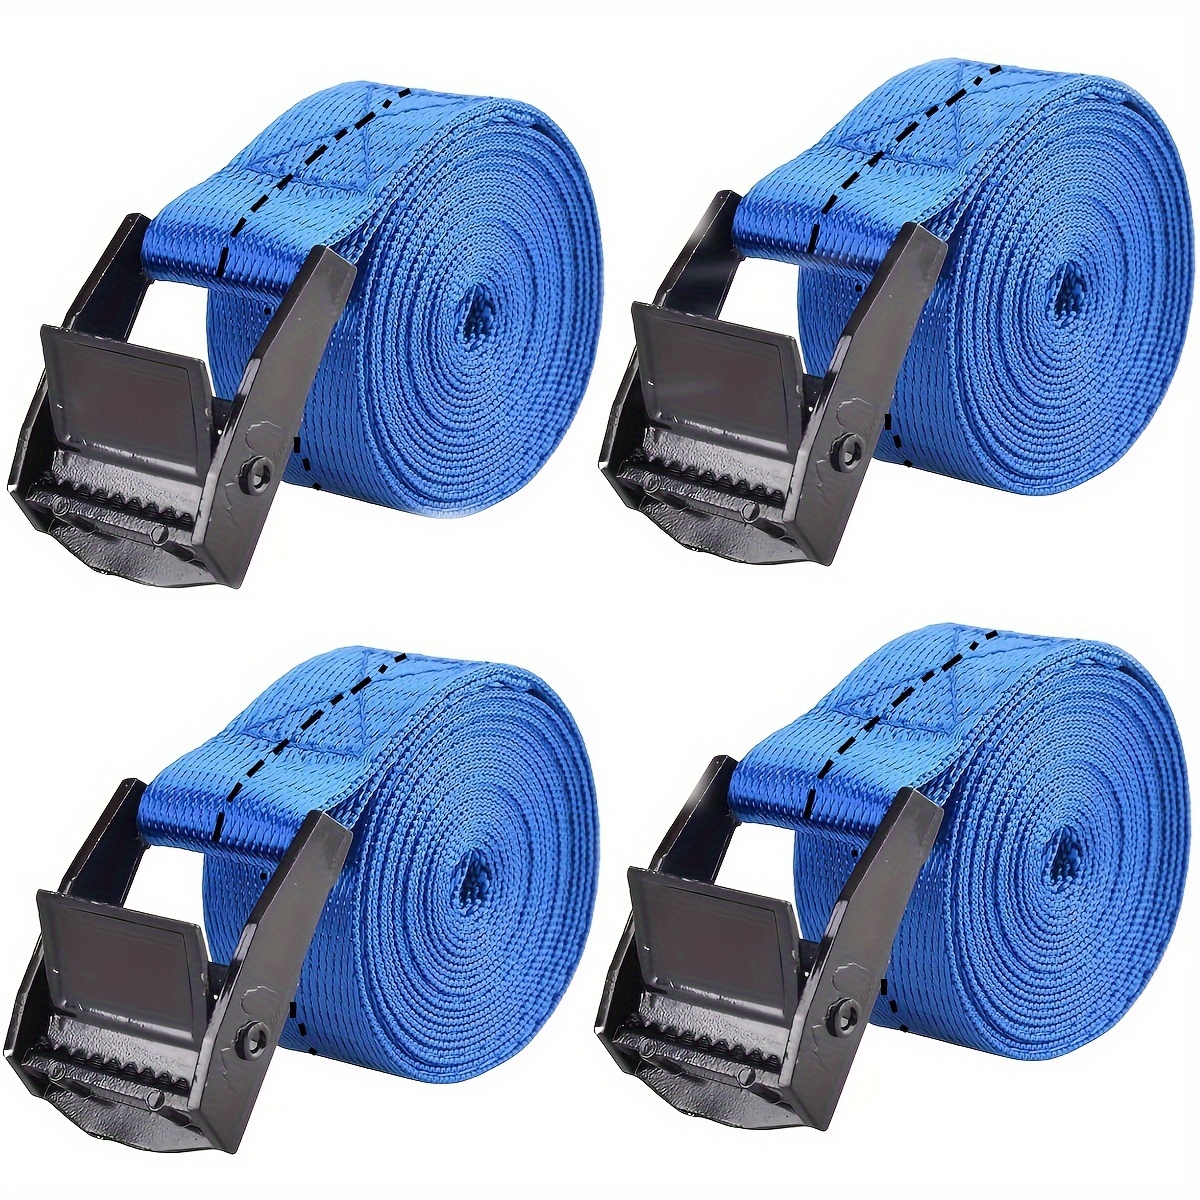 2PCS Lashing Straps with Buckles Adjustable, Up to 600Lbs, Tie Down for  Motorcycle, Cargo, Trucks, Trailer, Luggage